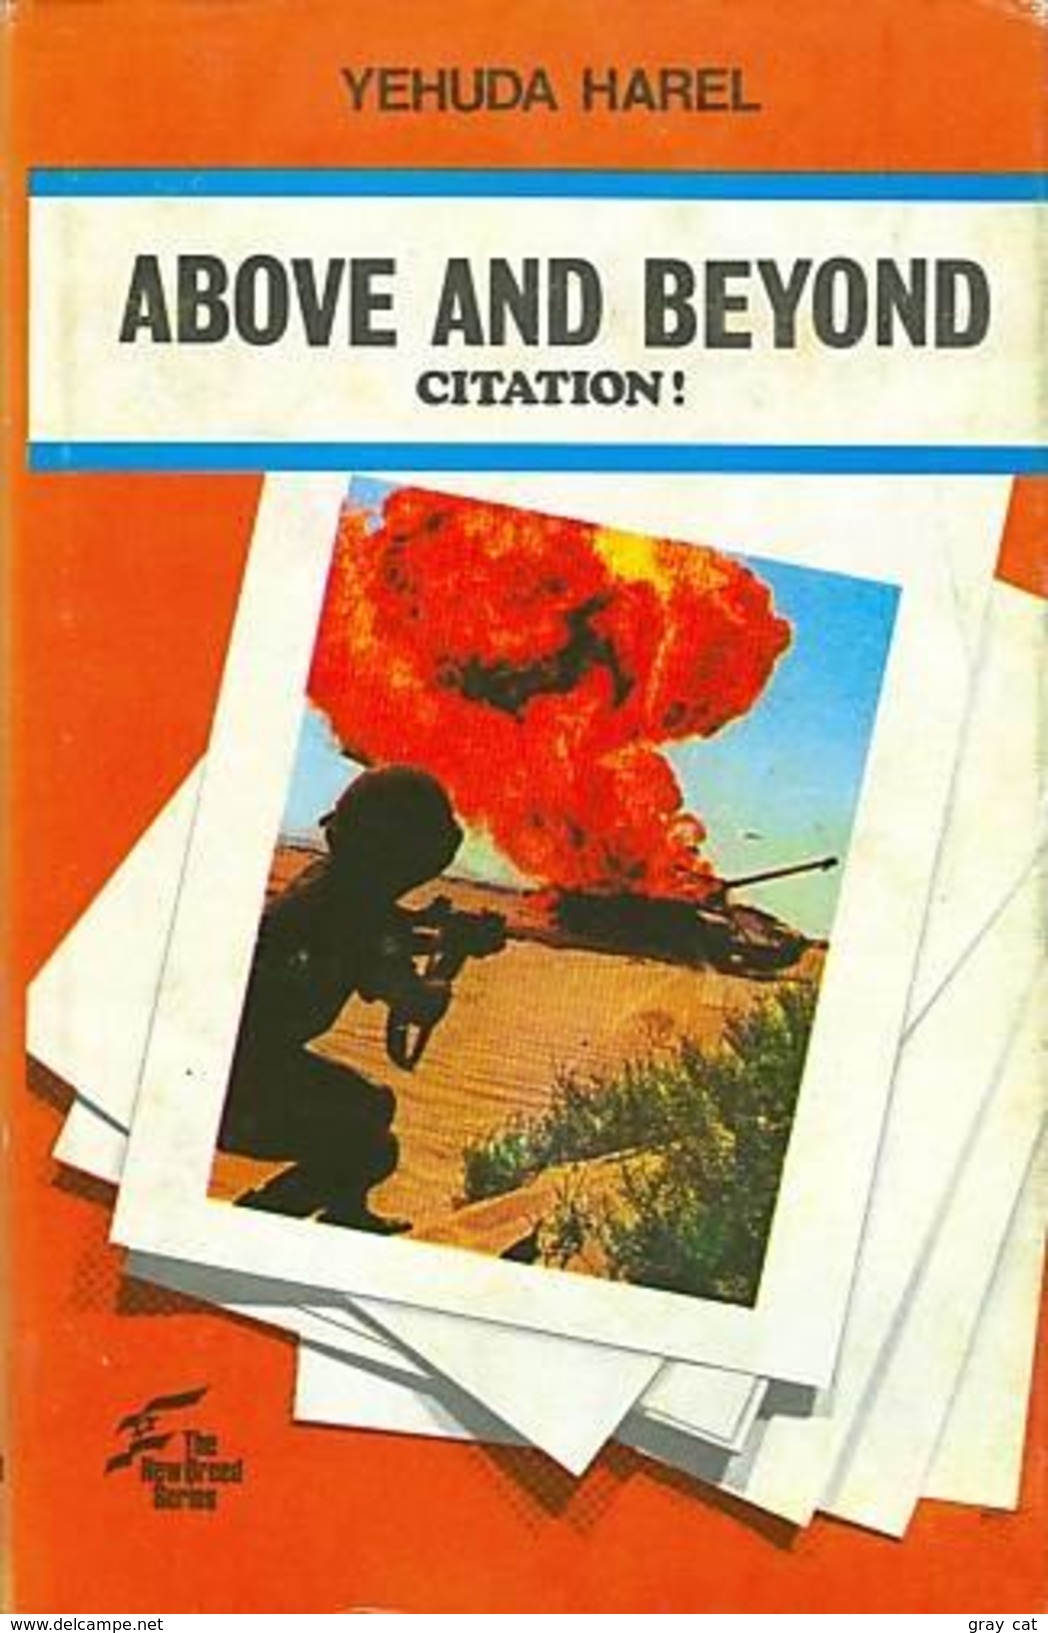 ABOVE AND BEYOND: CITATION ! Heroic Stories Of The Israeli Army By Yehuda Harel - Moyen Orient